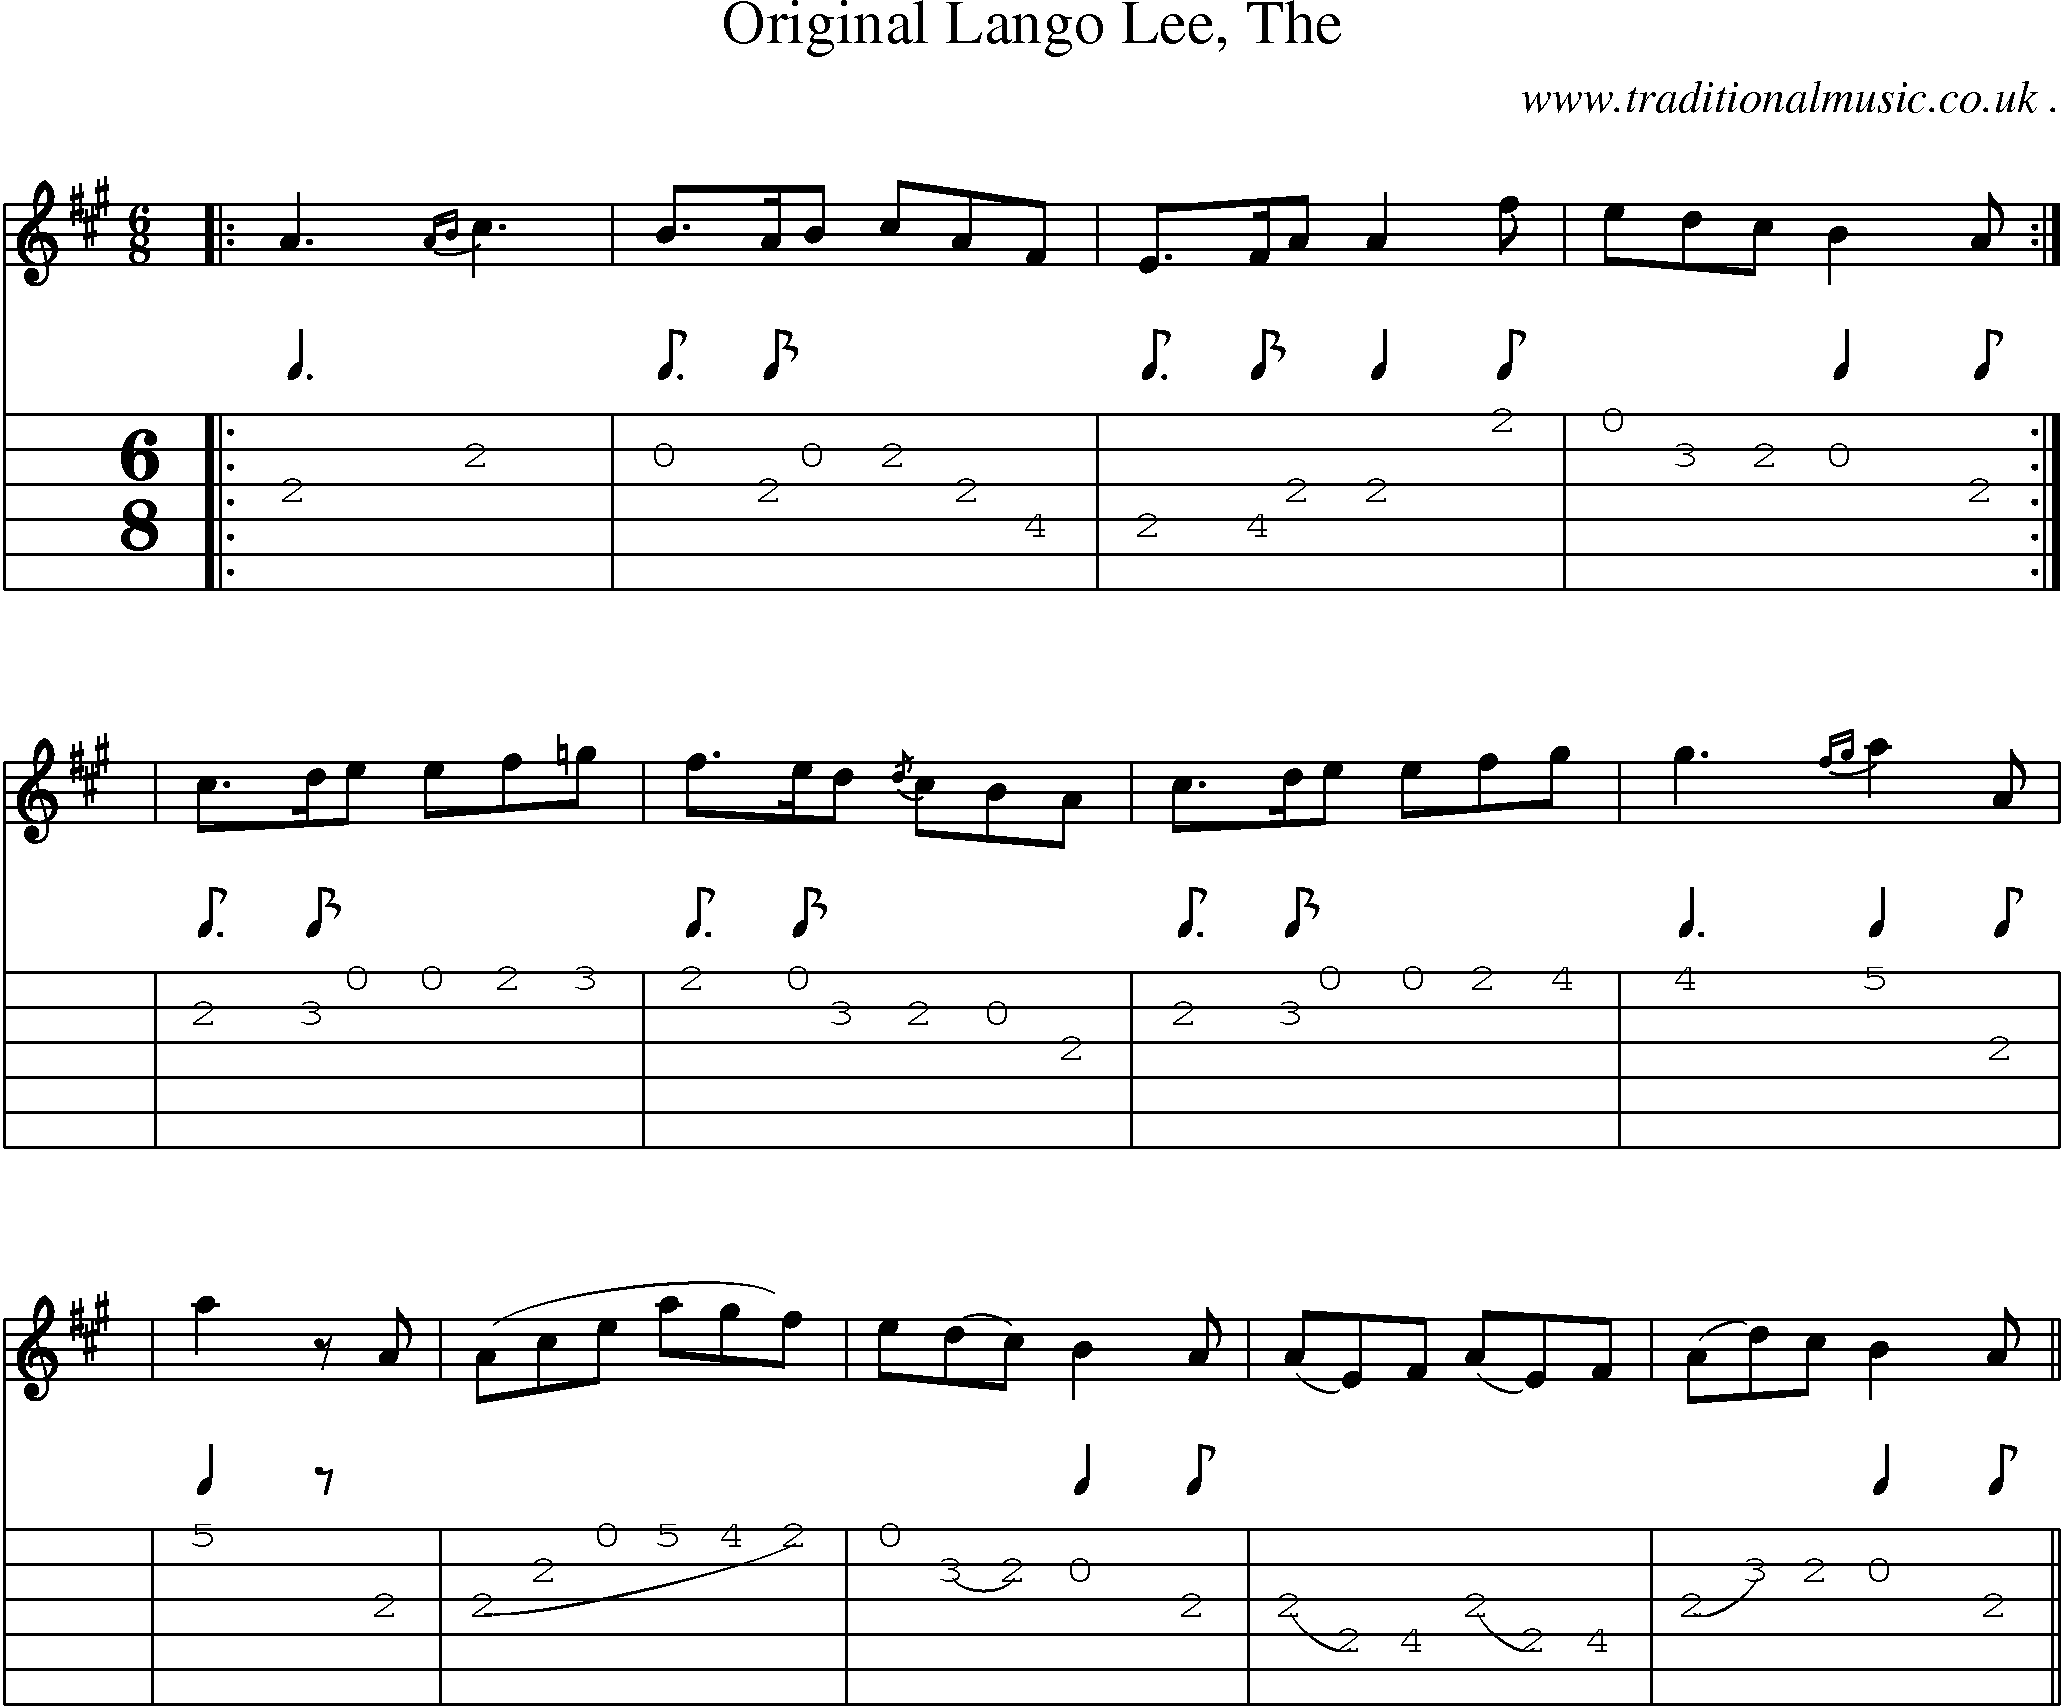 Sheet-music  score, Chords and Guitar Tabs for Original Lango Lee The